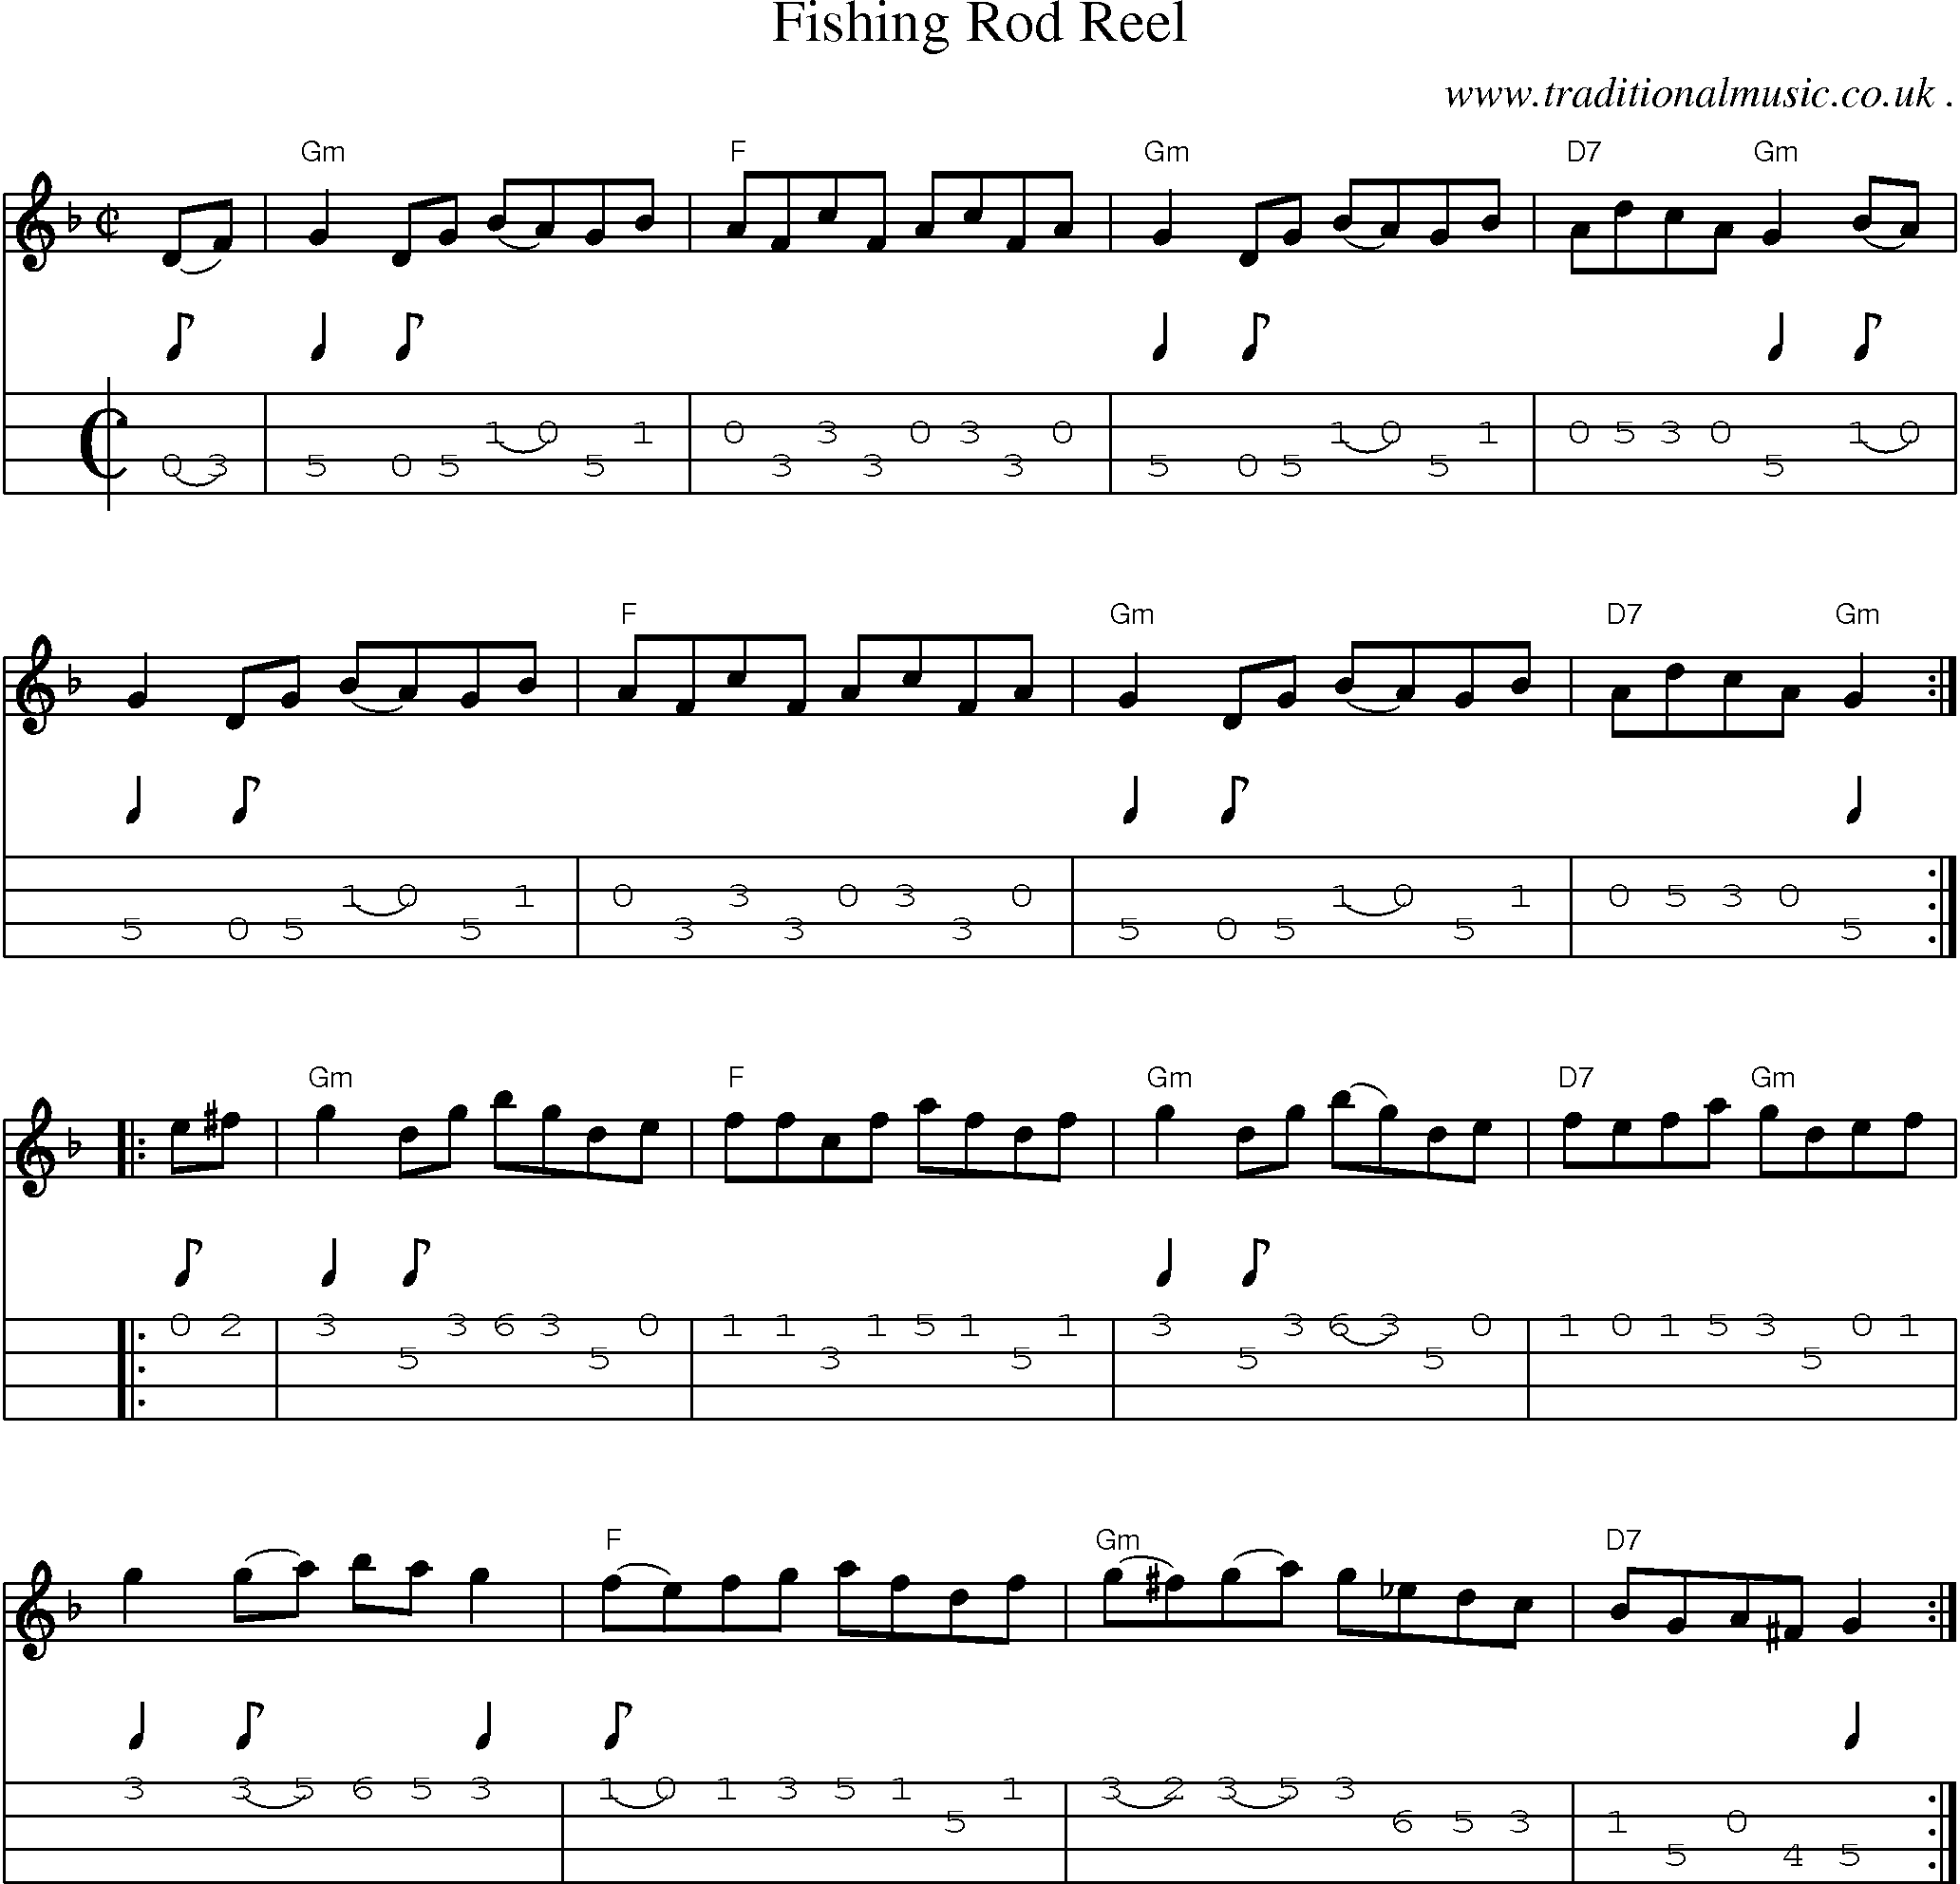 Music Score and Mandolin Tabs for Fishing Rod Reel